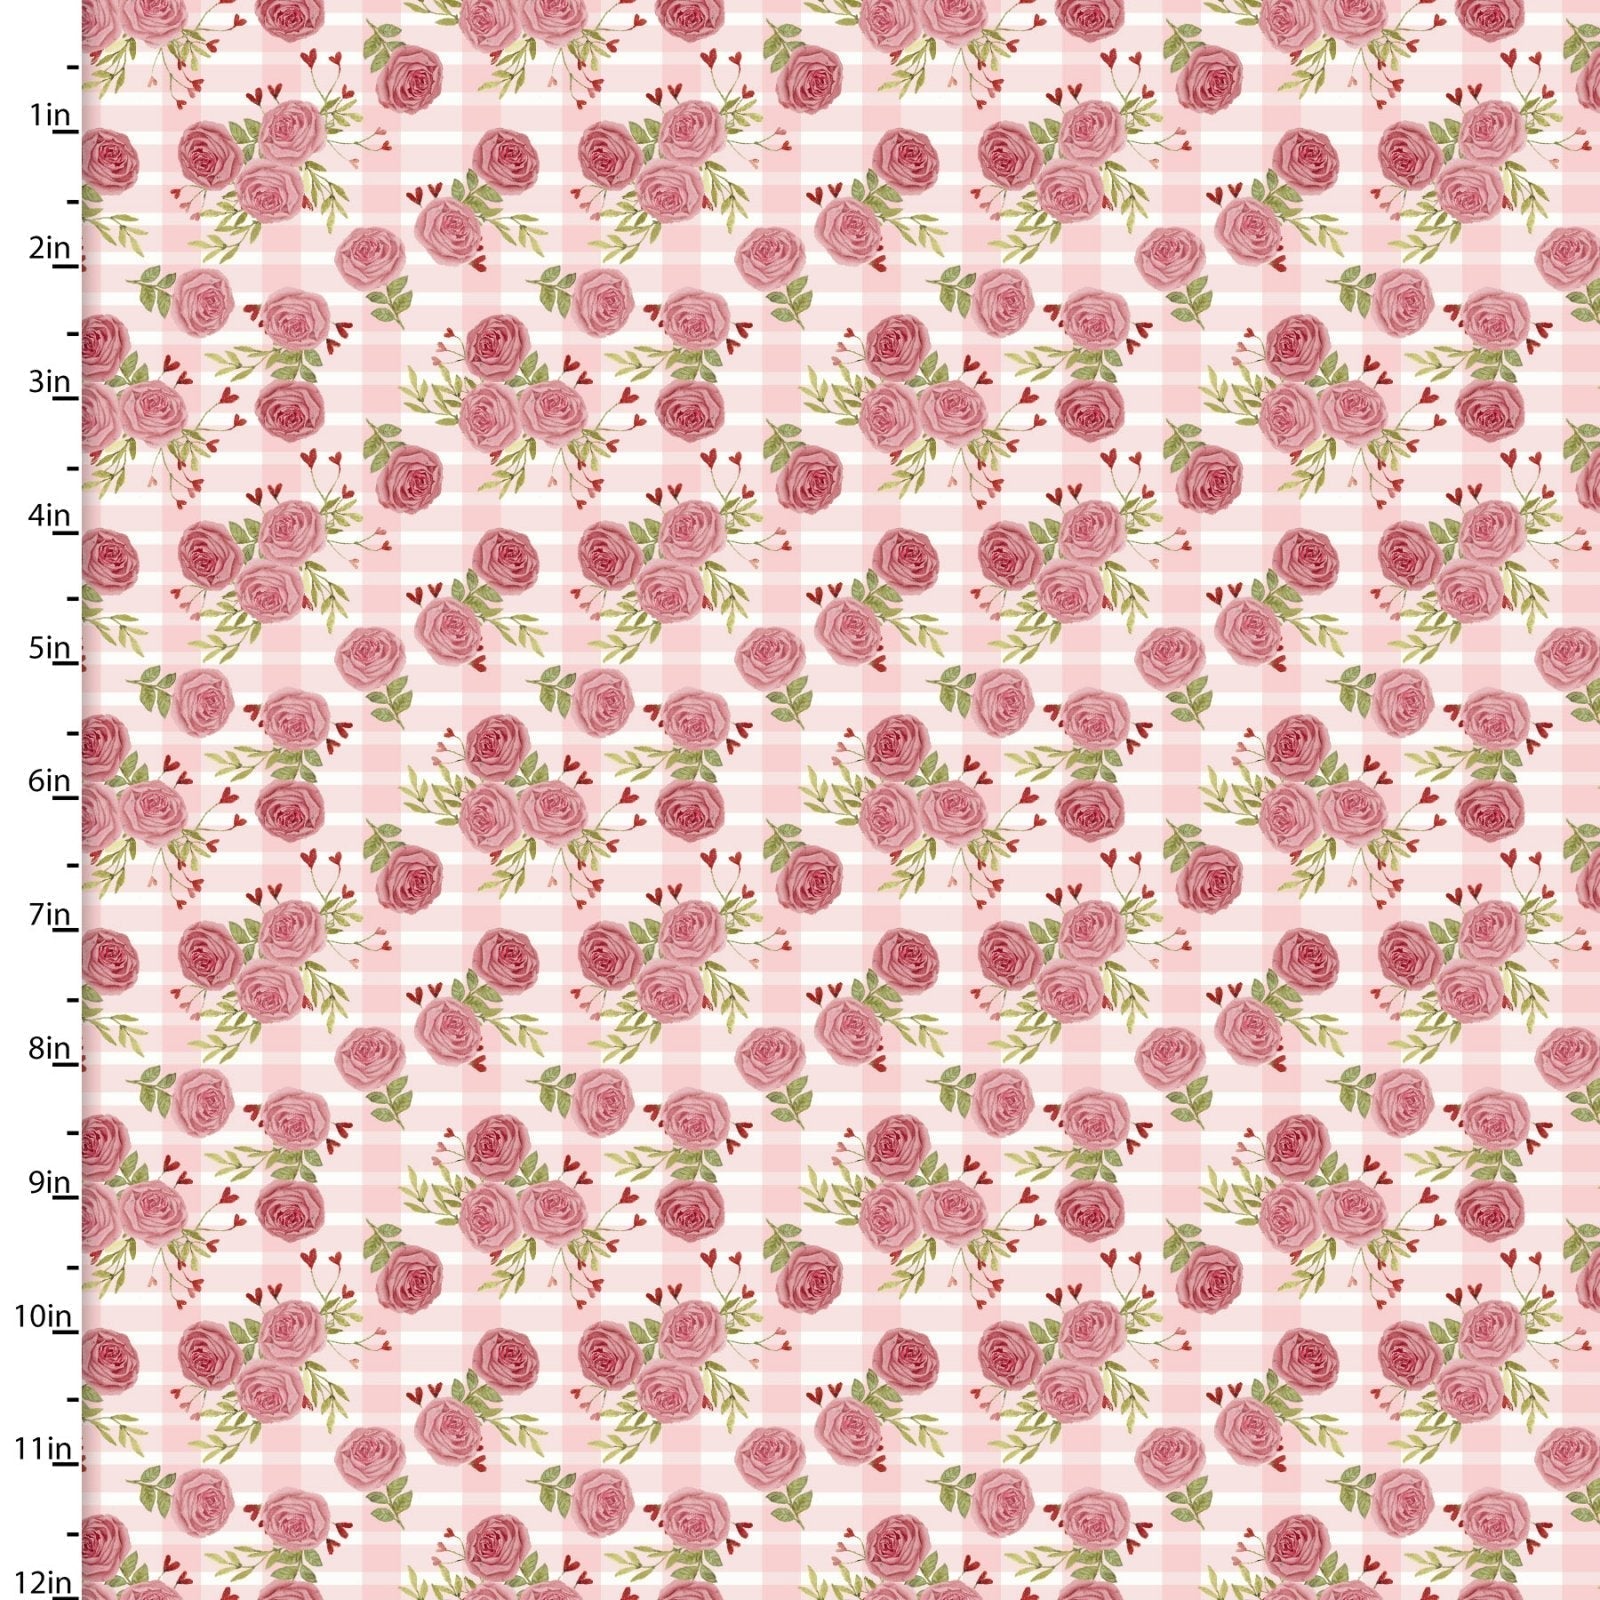 Pink and white gingham with deep pink roses and little red hearts growing out of the leaves 100% cotton fabric.